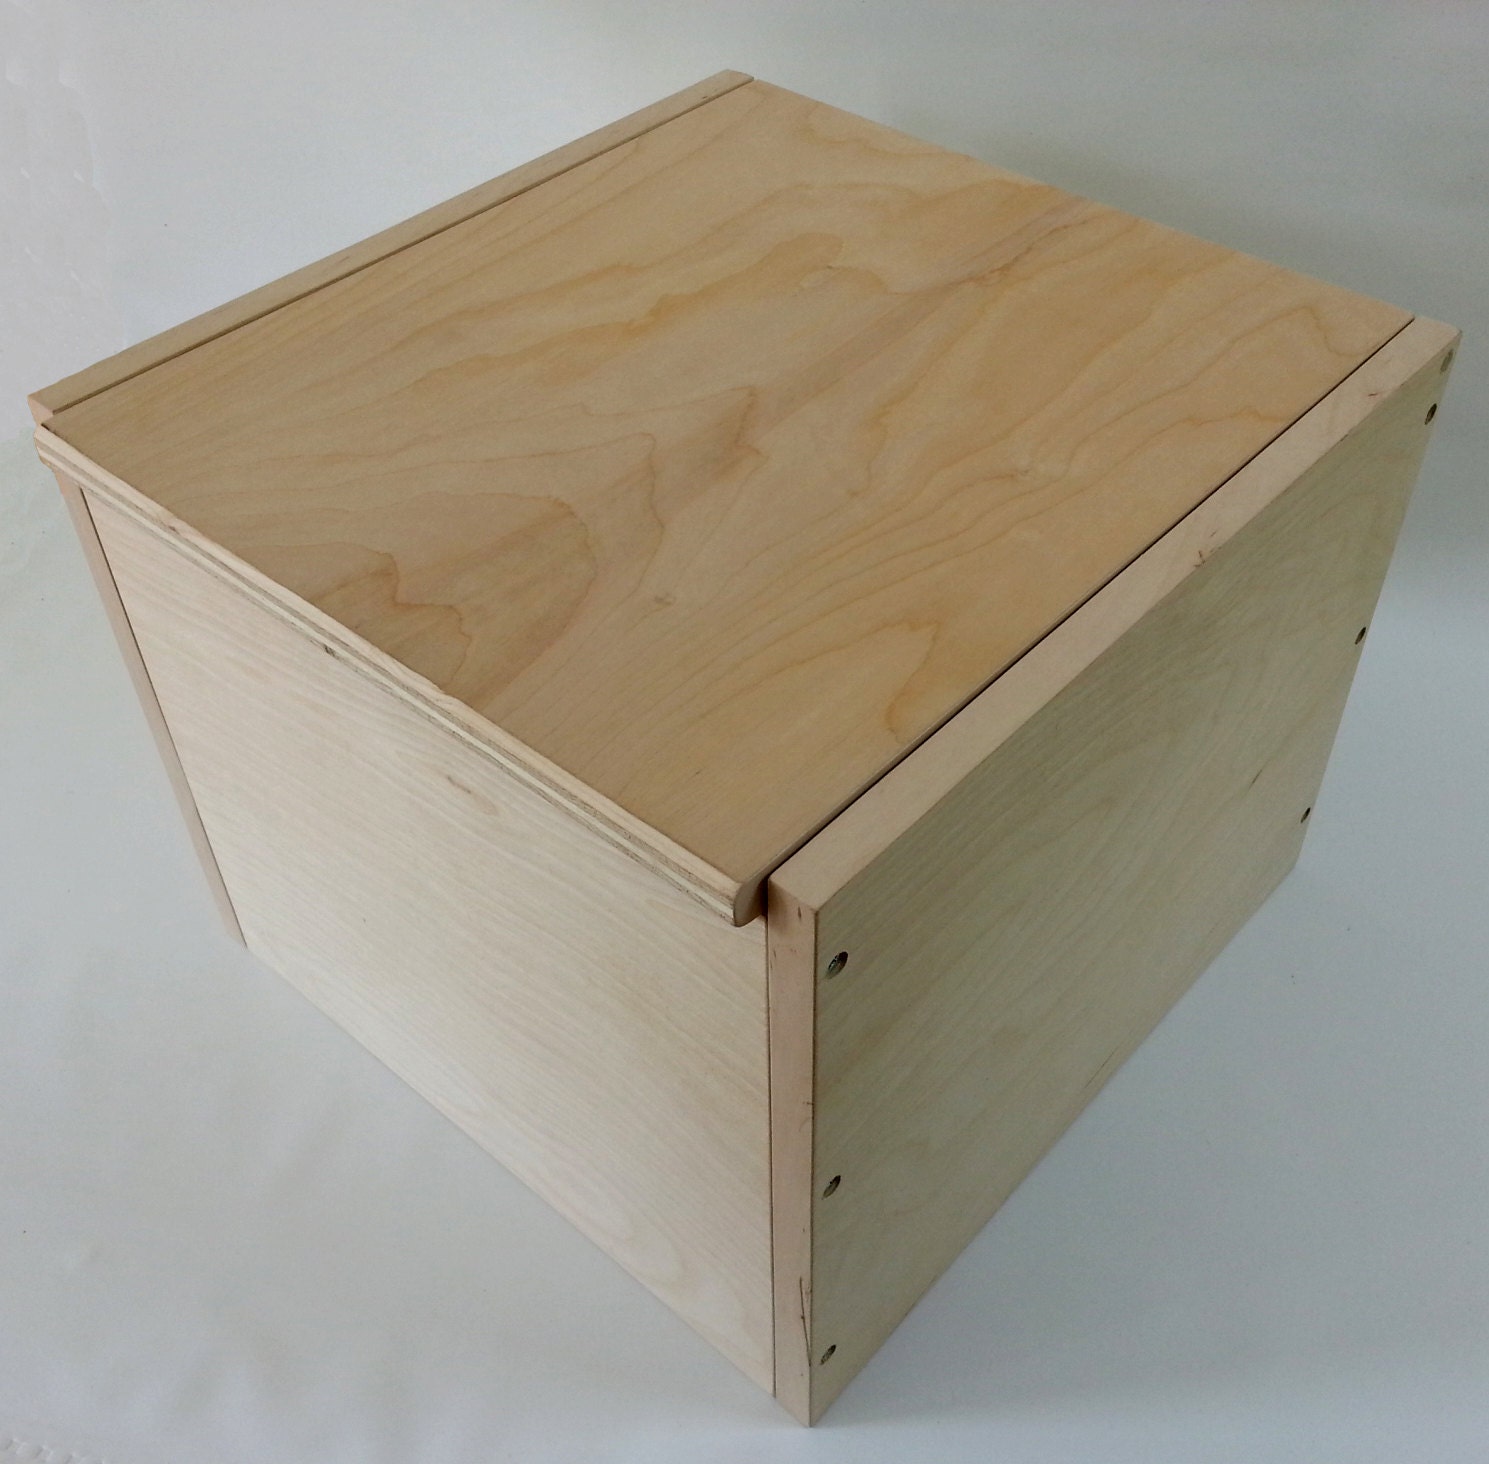 Sturdy Plywood Box with Lid Unfinished Plywood Box by LumberNerd